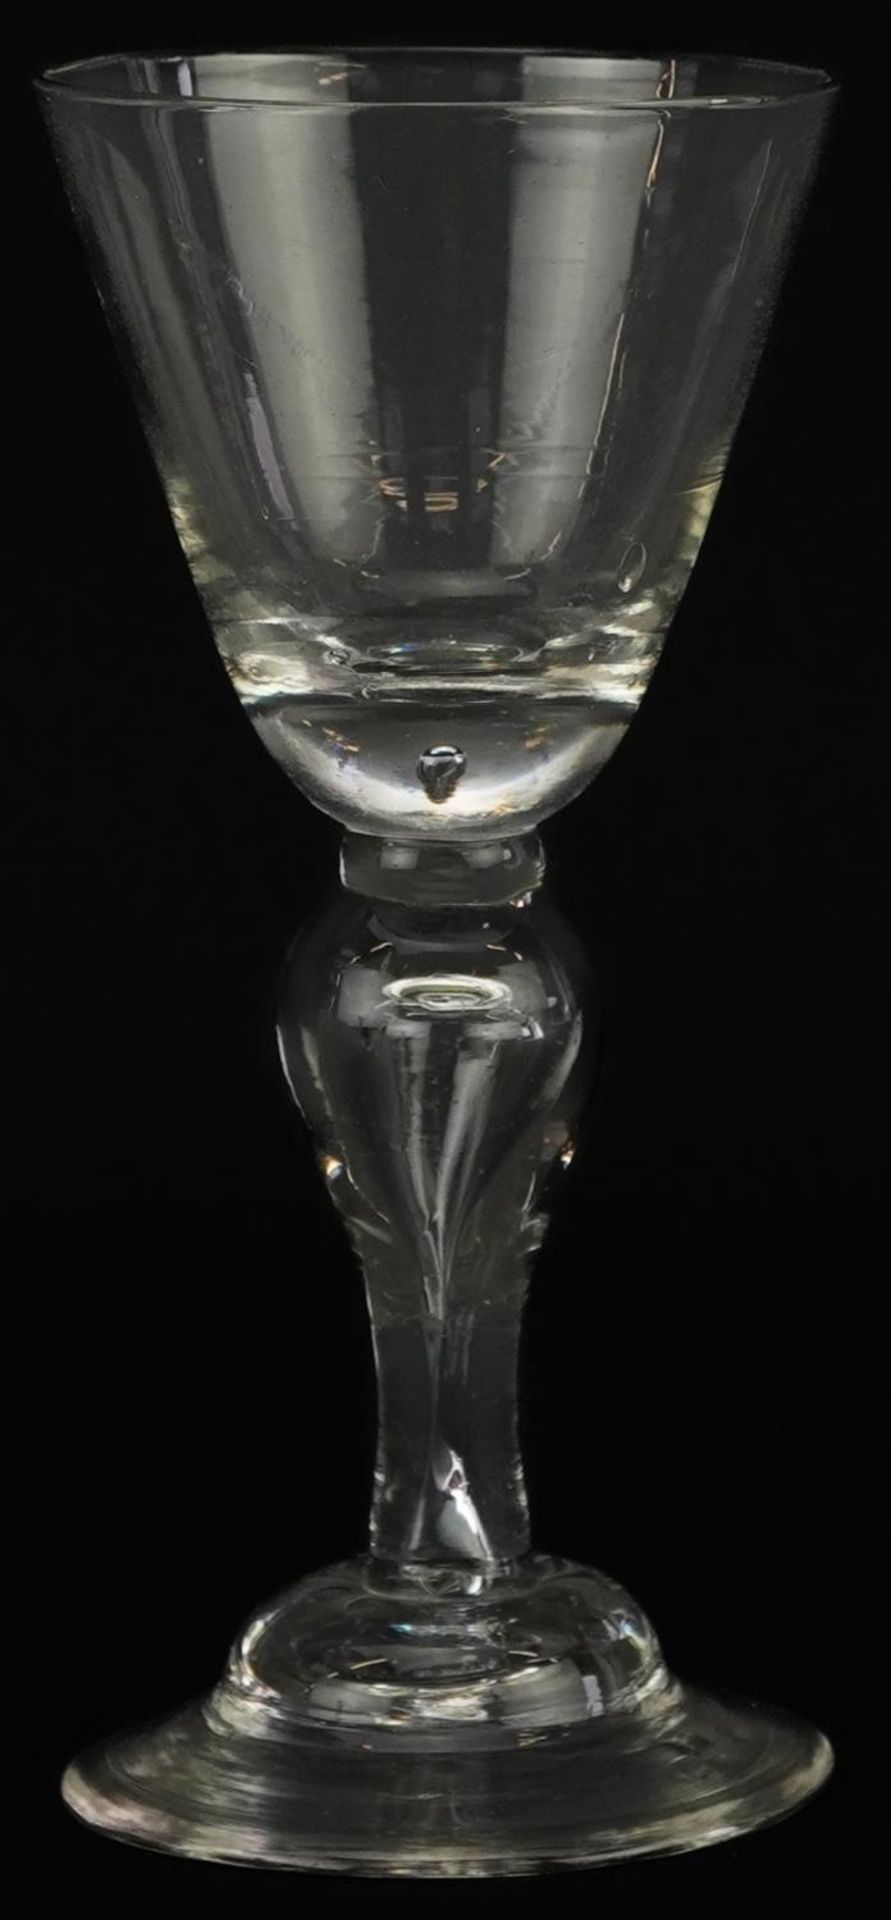 18th century wine glass with baluster stem, 14cm high - Image 3 of 4